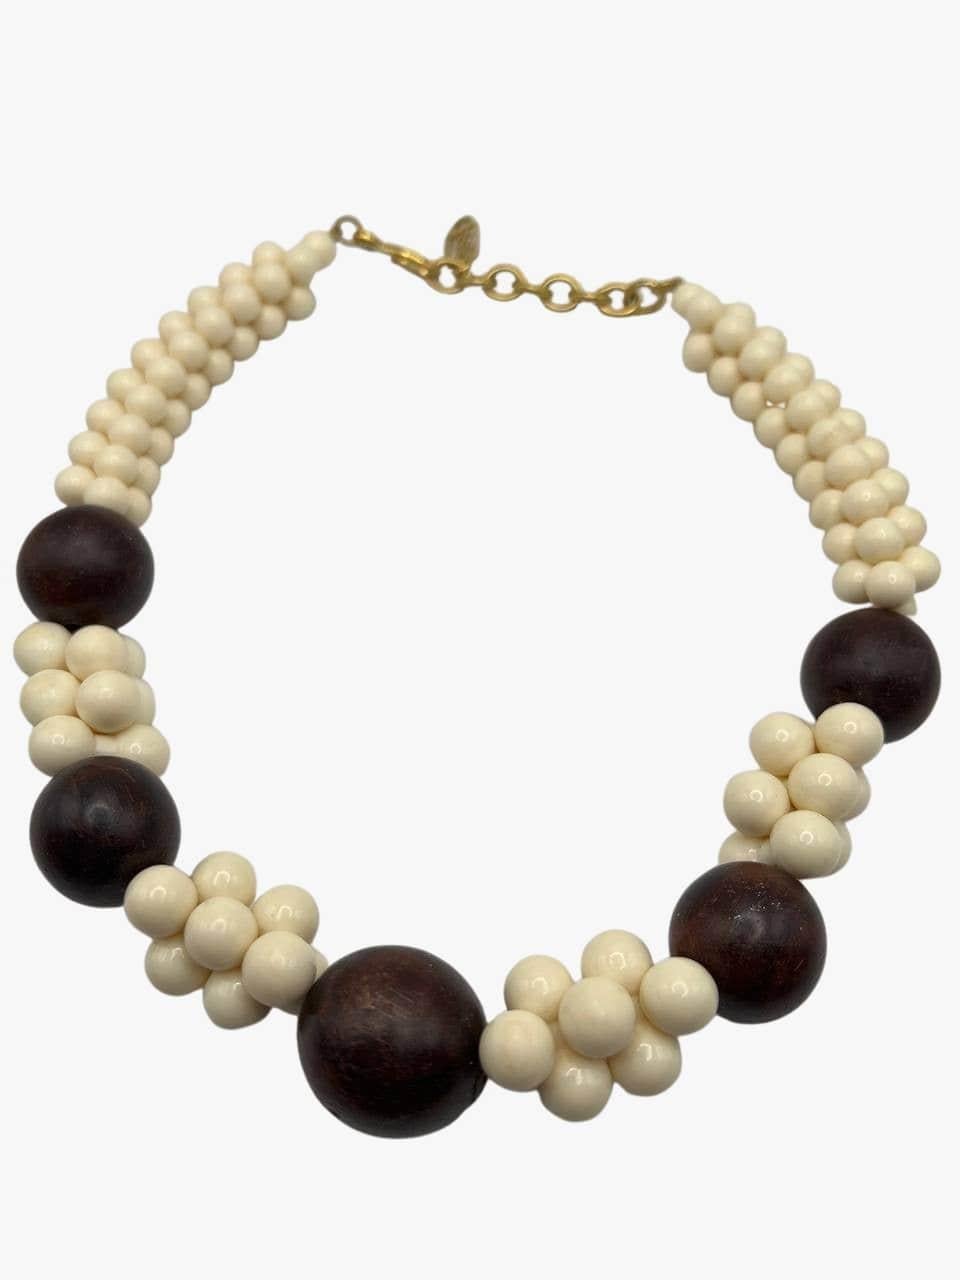 Vintage massive ivory resin and dark-brown wood beaded necklace by Yves Saint Laurent. Gold-tone metal hook closure. 
Signed. YSL mark on the clasp. 
Year: 1967 (SS67 African Collection)
Length: 48cm
Condition: Very good. no visible signs of